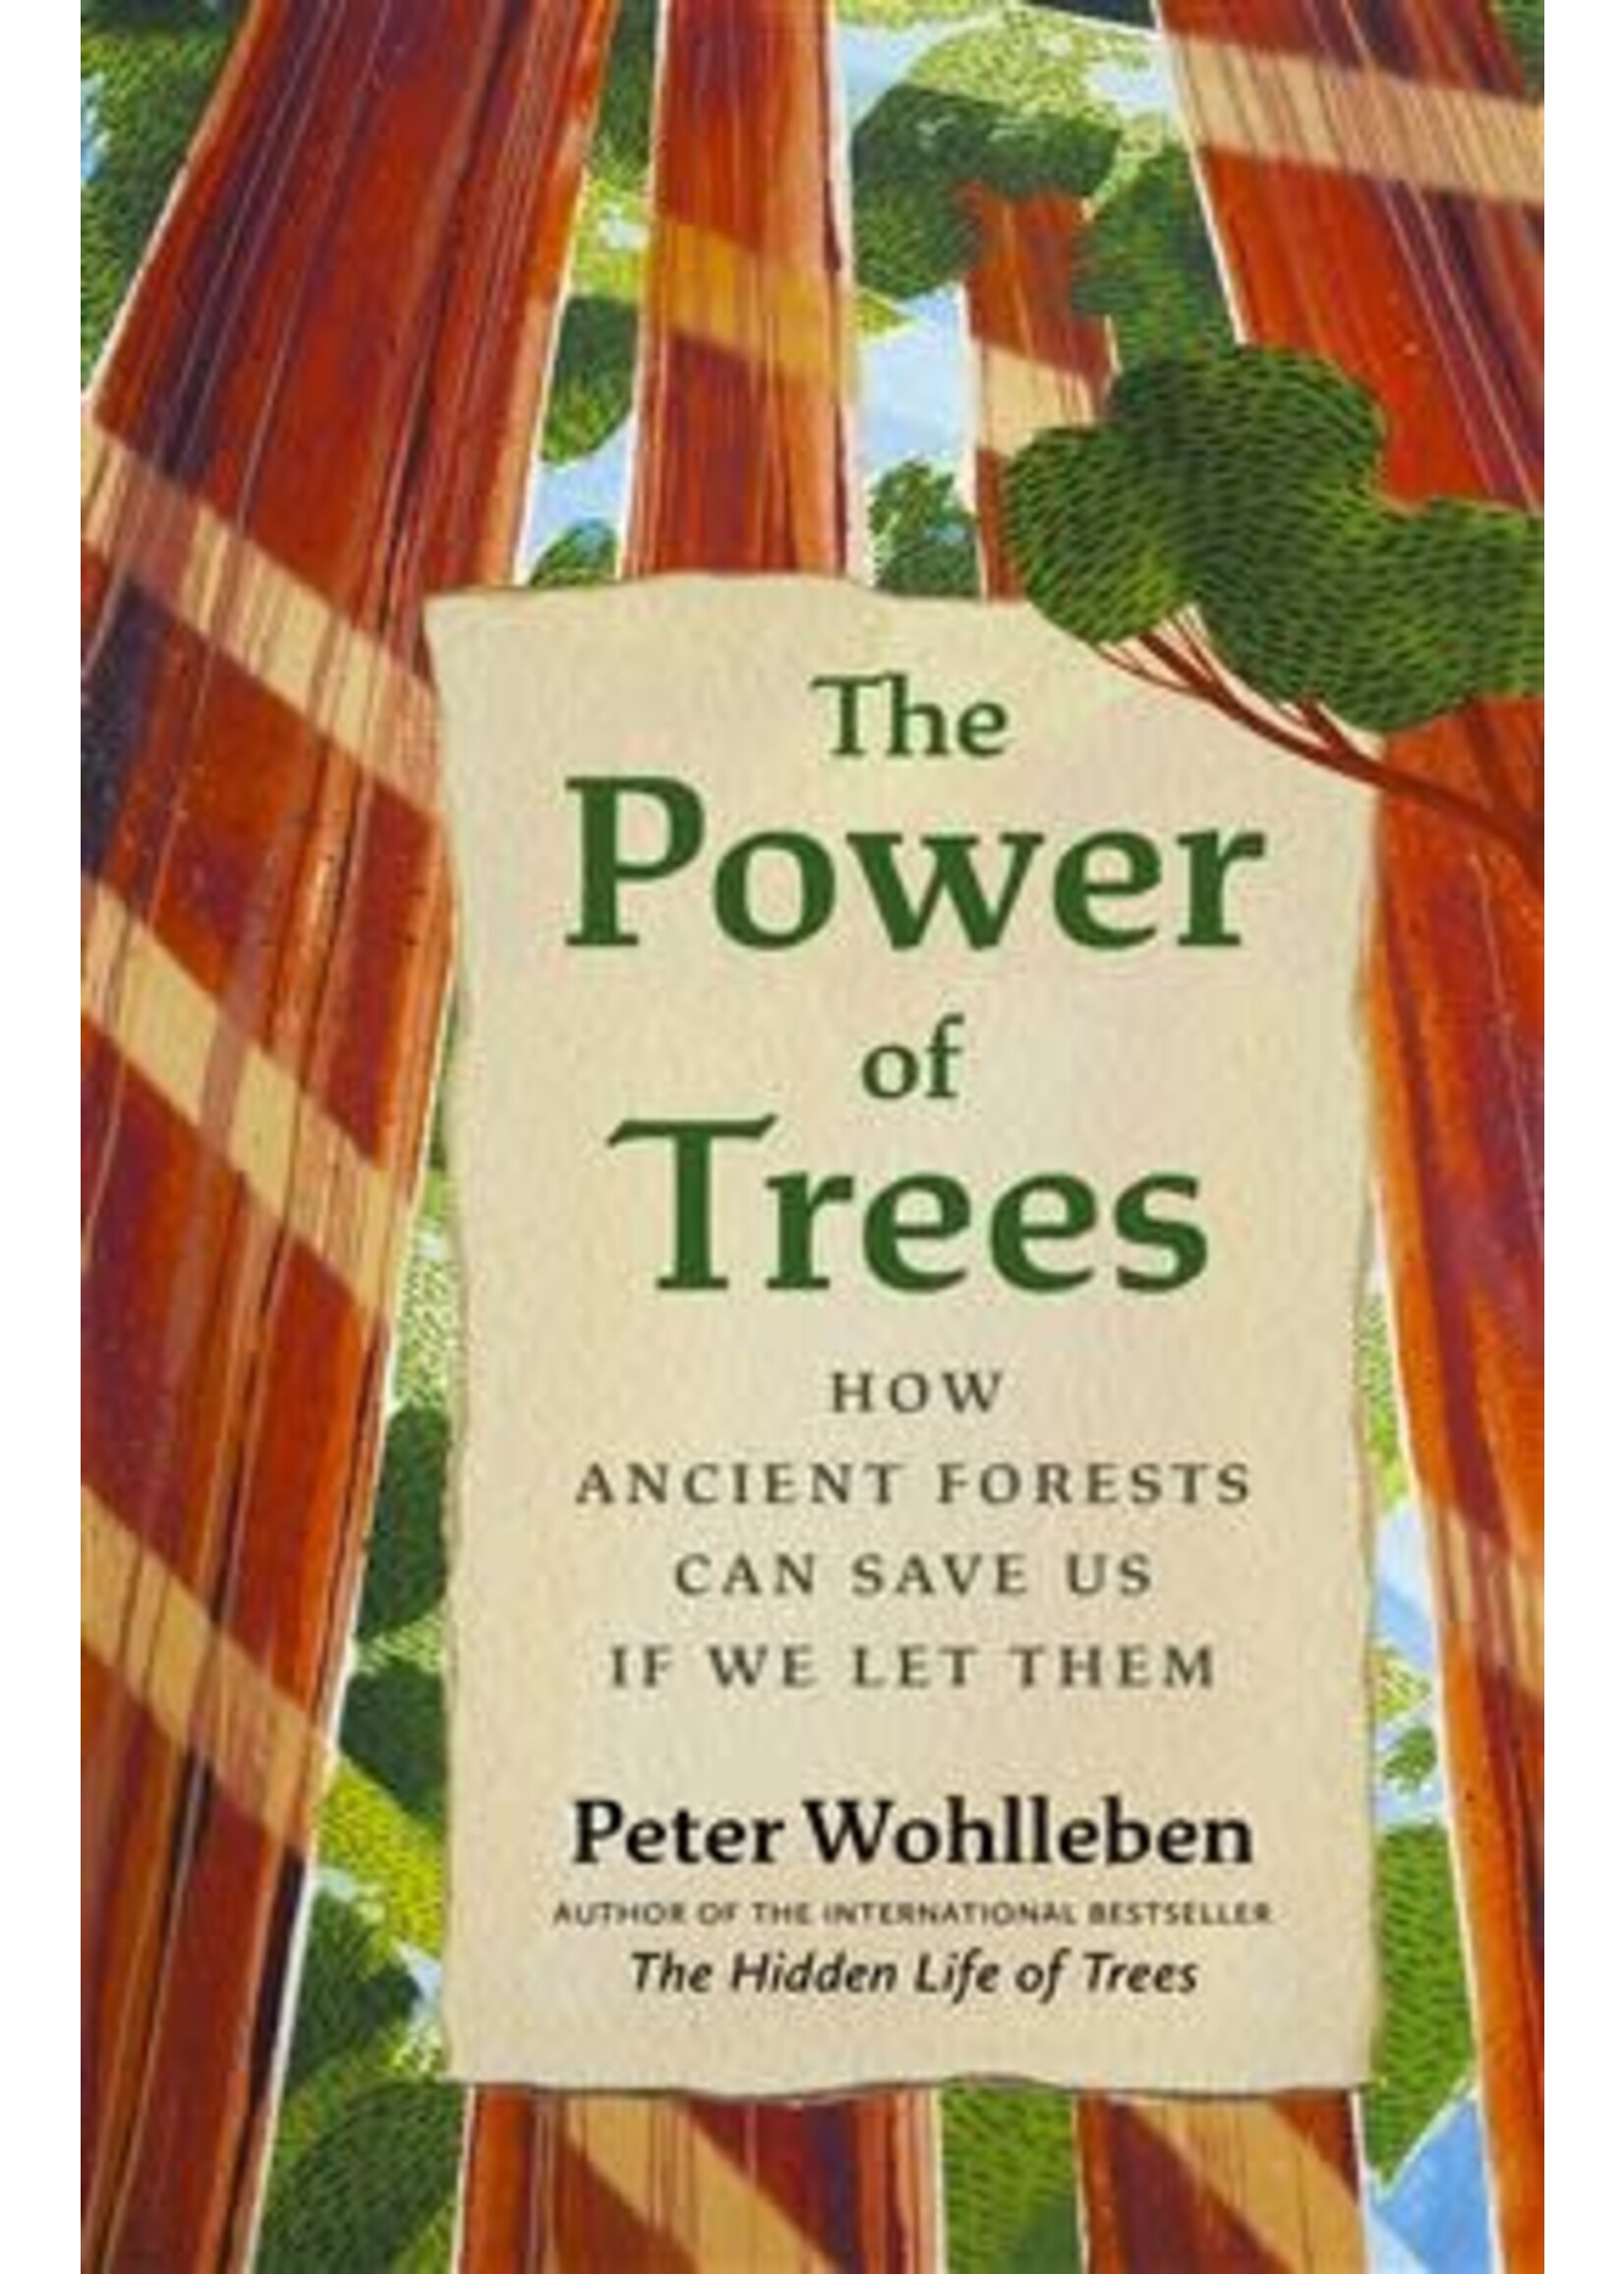 The Power of Trees: How Ancient Forests Can Save Us if We Let Them  by Peter Wohlleben